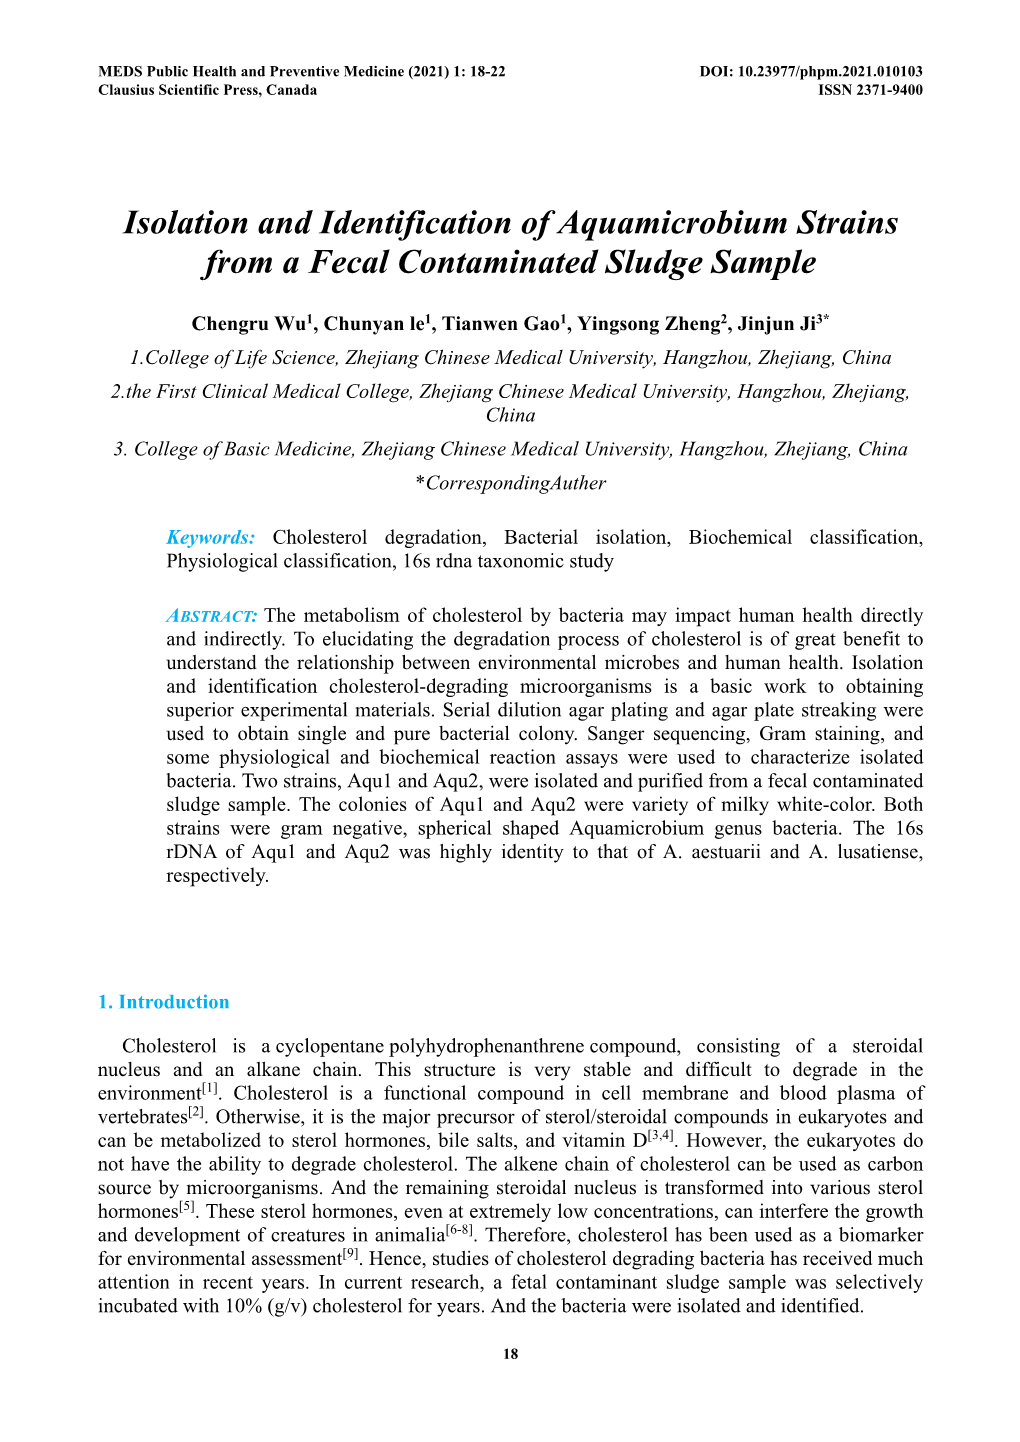 Isolation and Identification of Aquamicrobium Strains from a Fecal Contaminated Sludge Sample